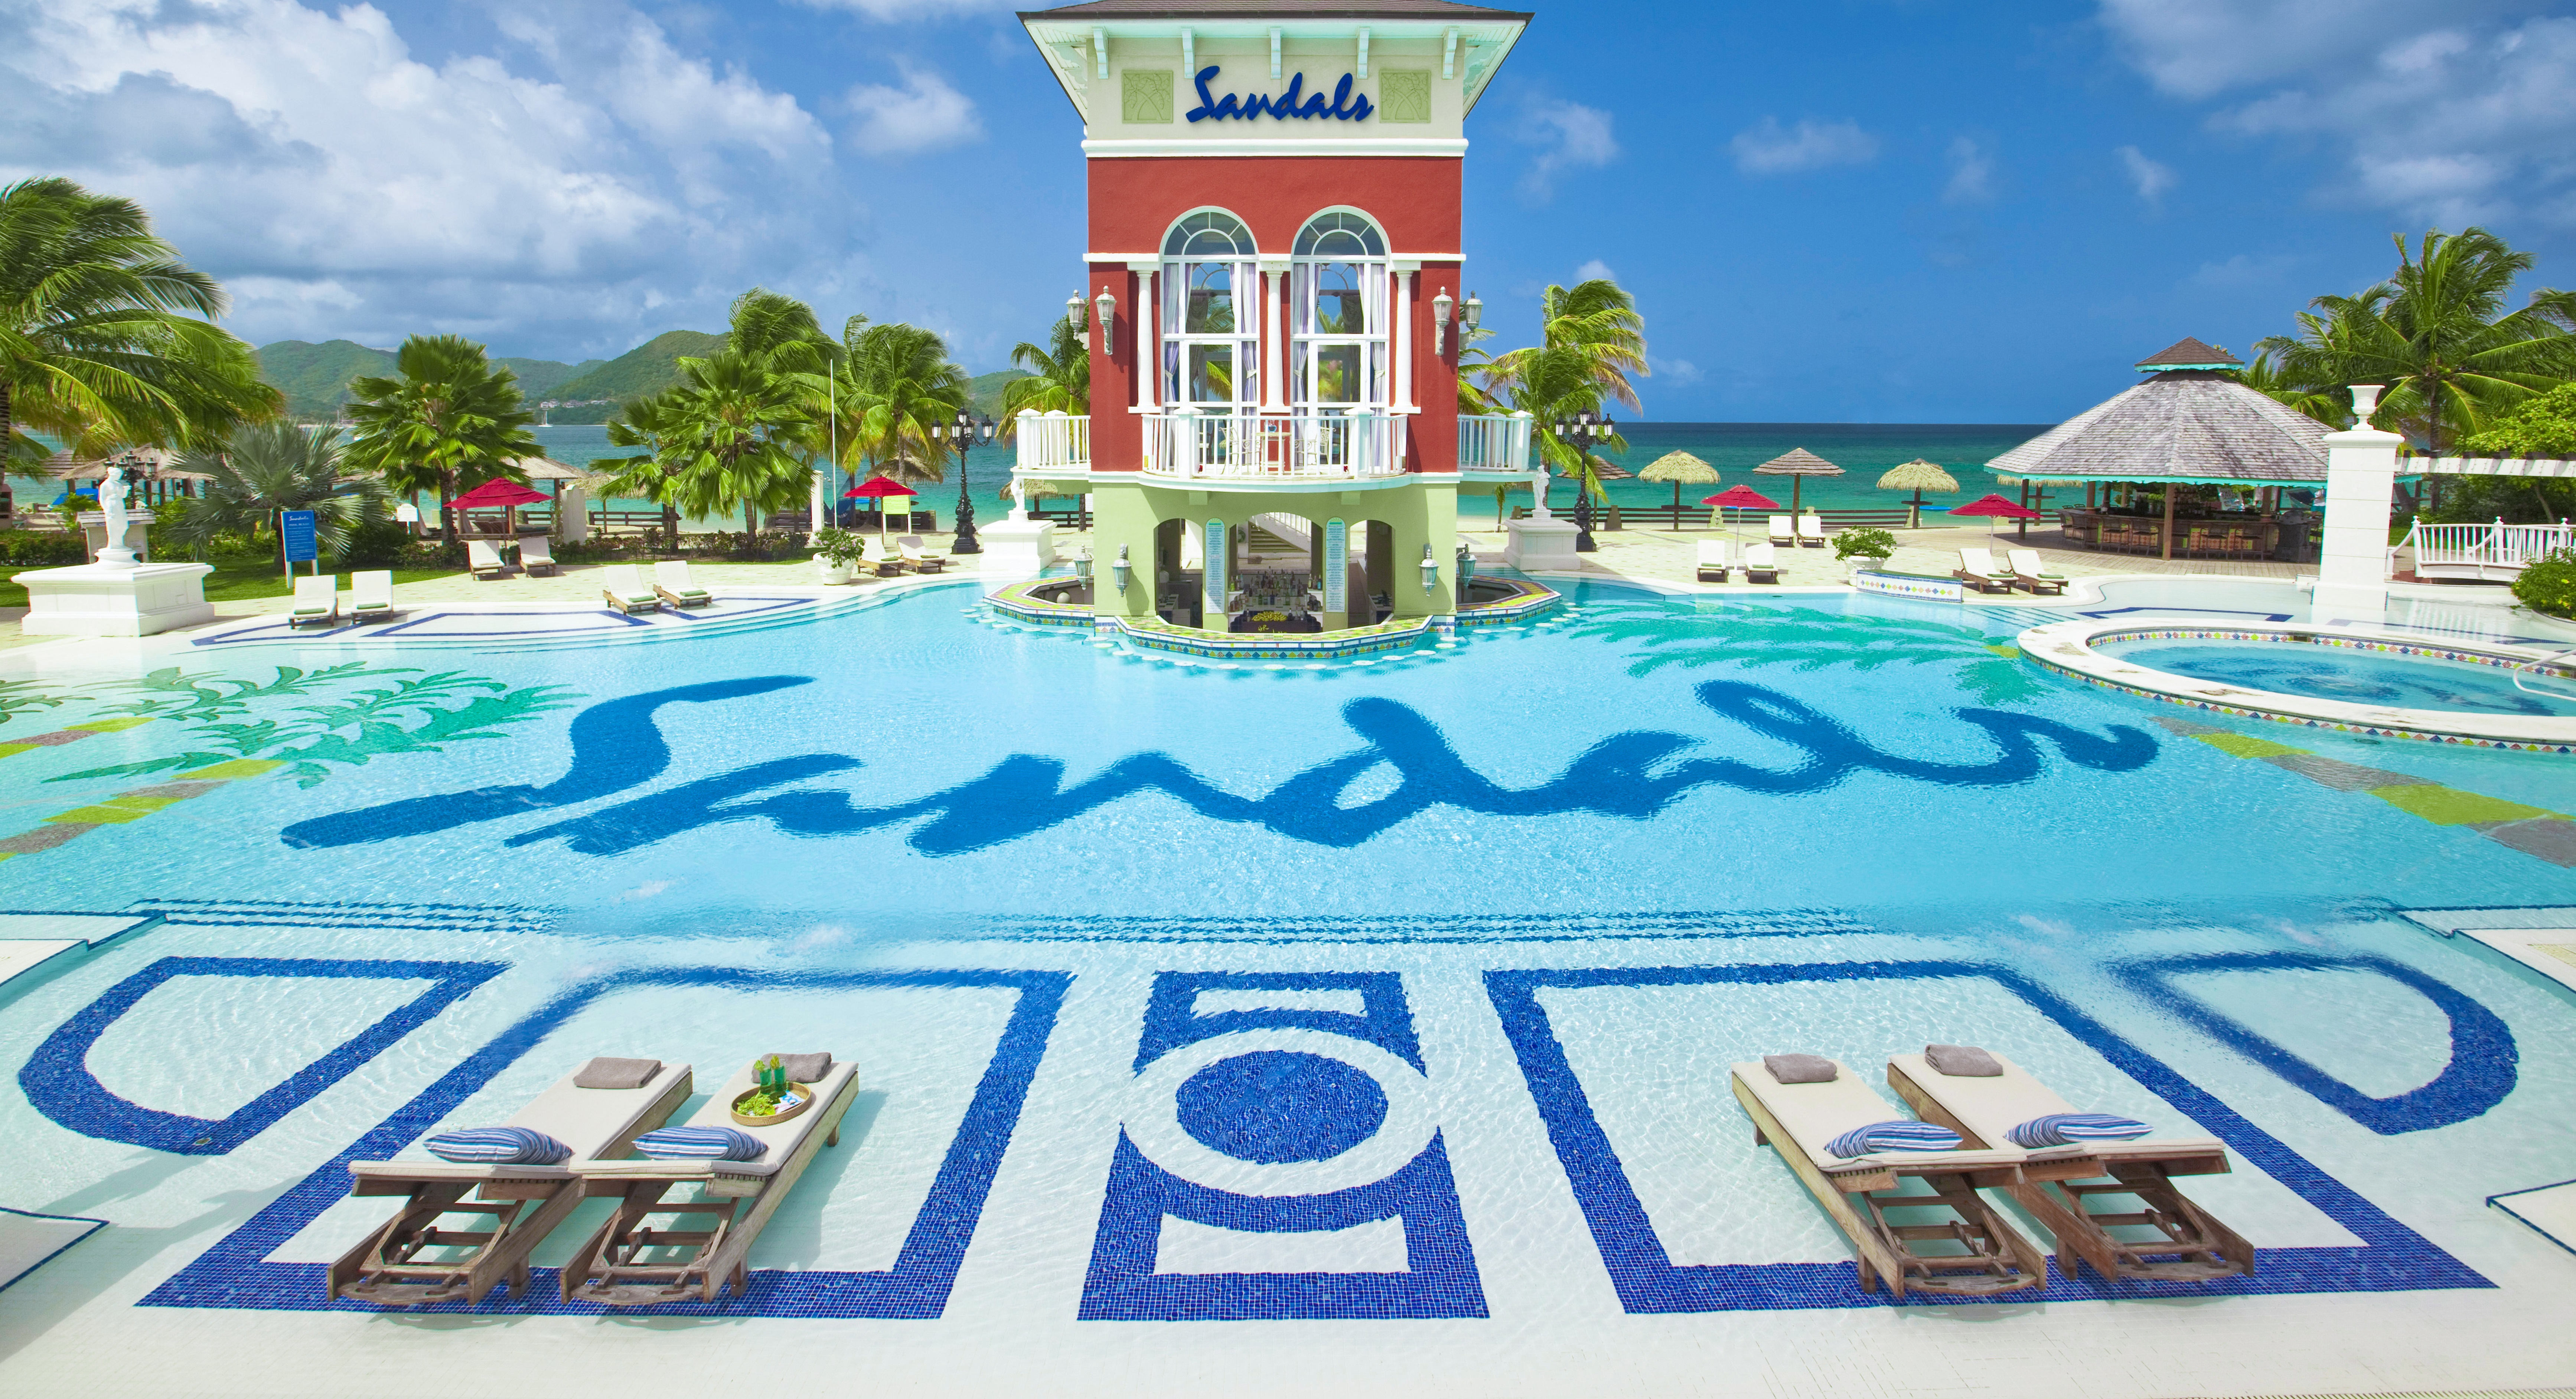 Is a Sandals Holiday Worth It?